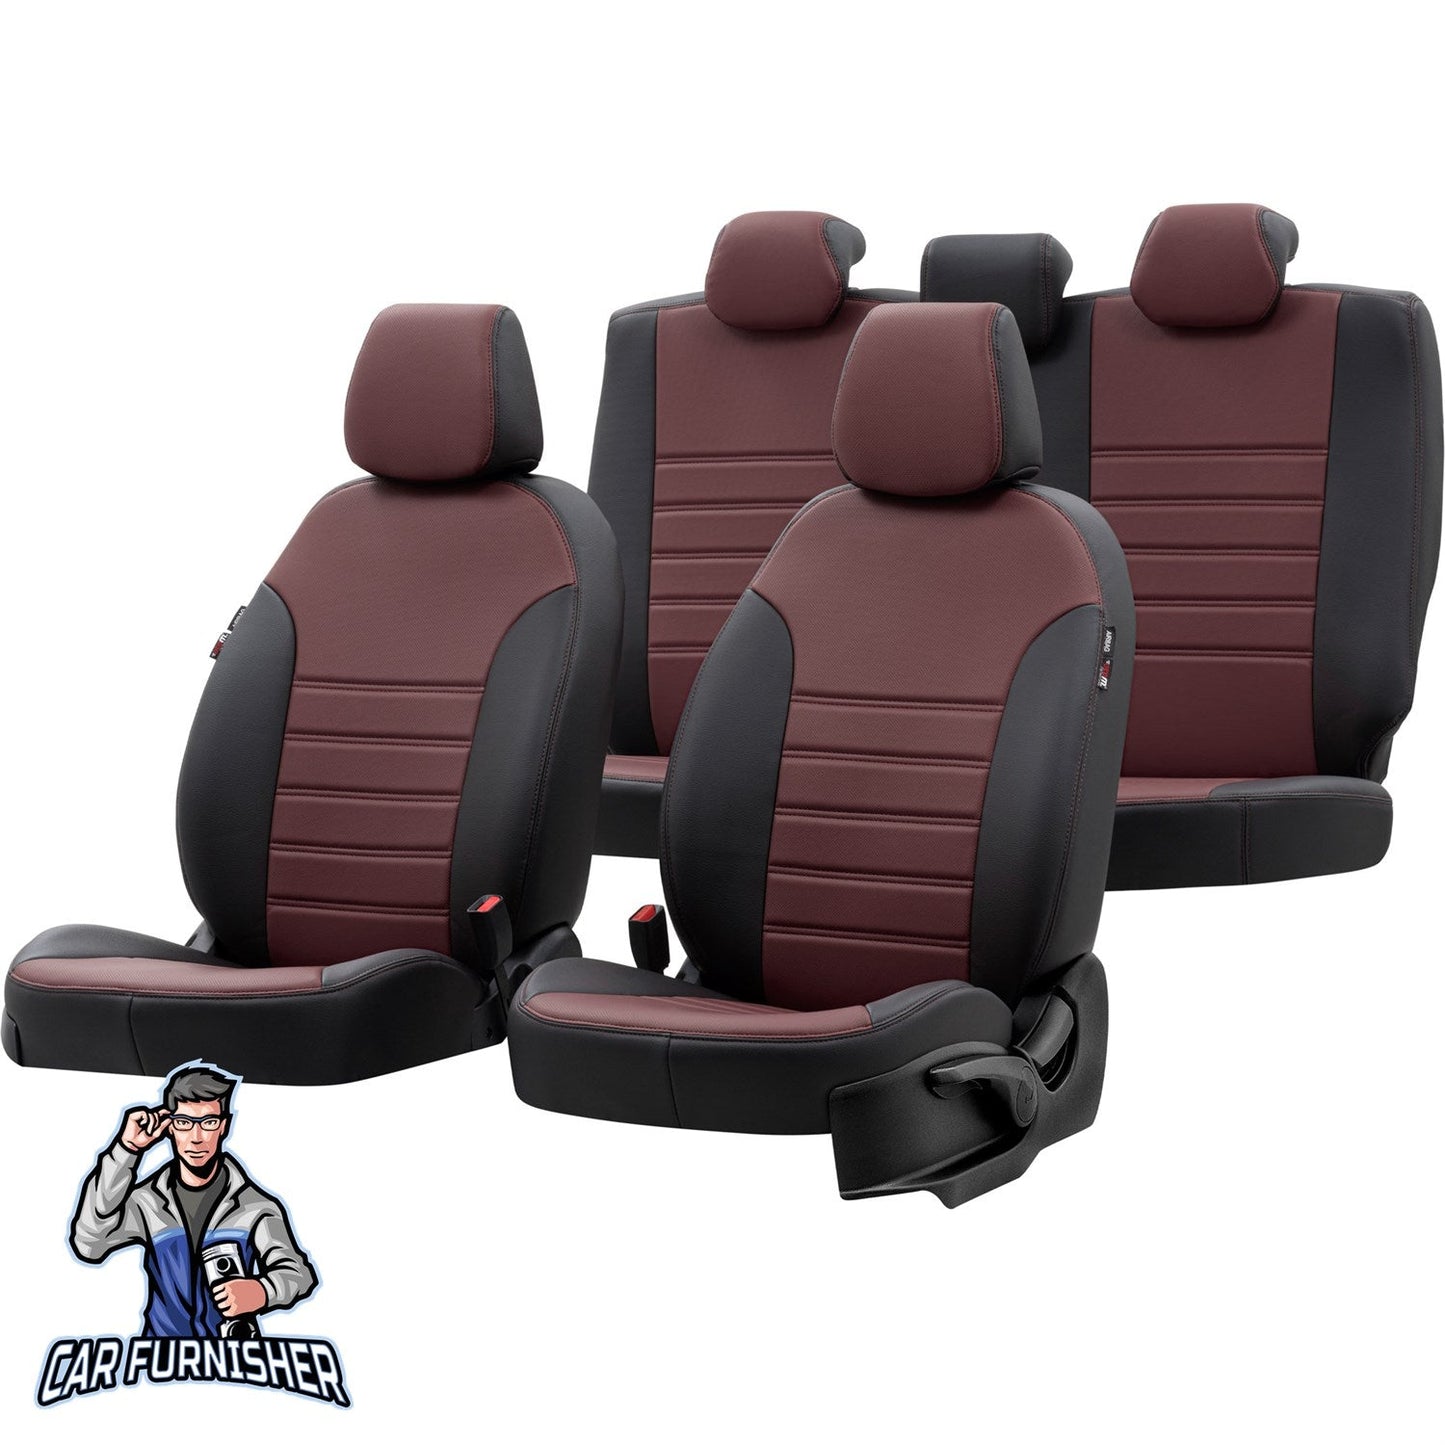 Kia XCeed Seat Covers Istanbul Leather Design Burgundy Leather